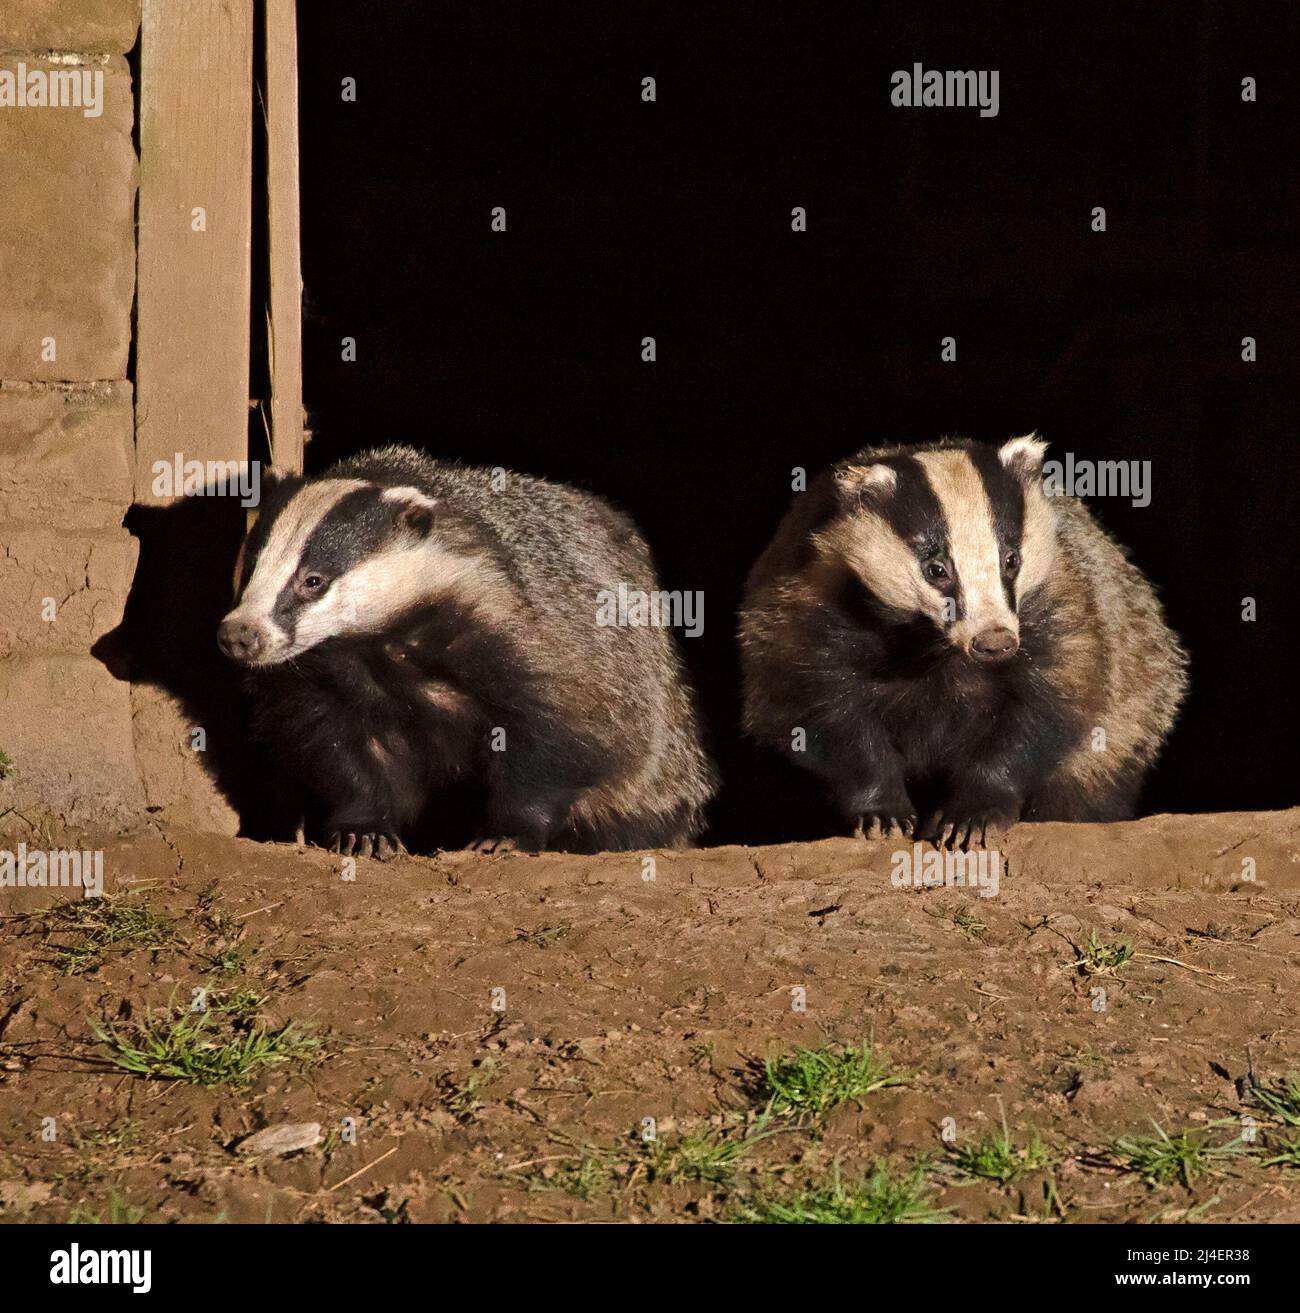 European Badger, Meles meles. A badger family, cete, has a nest, sett, inside an abandoned barn in Wensleydale, Yorkshire Dales National Park. Two bad Stock Photo